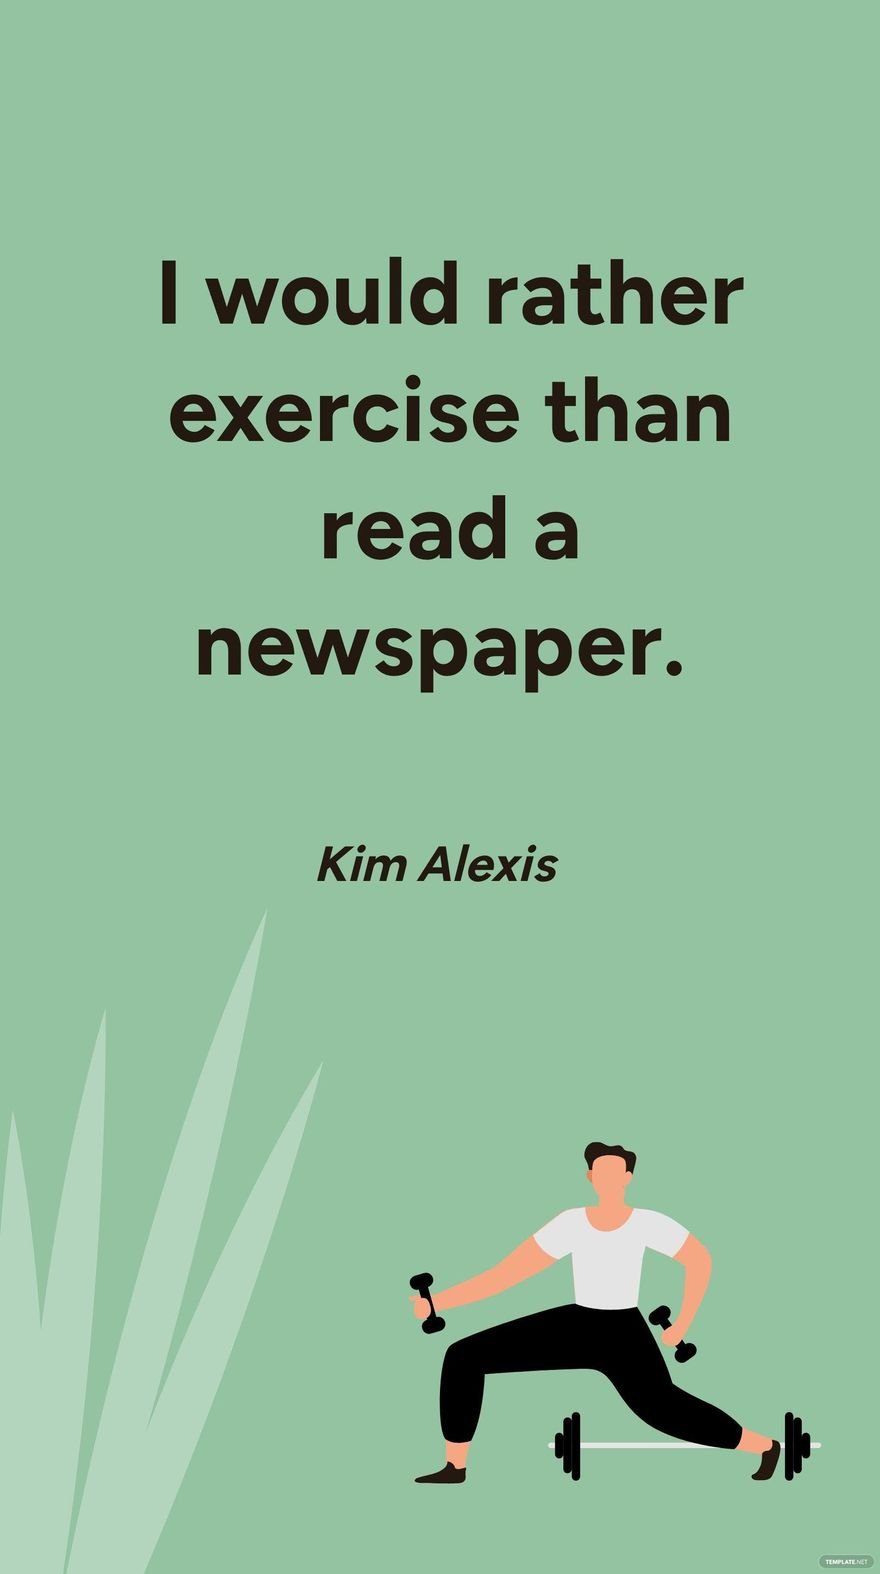 Kim Alexis - I would rather exercise than read a newspaper.